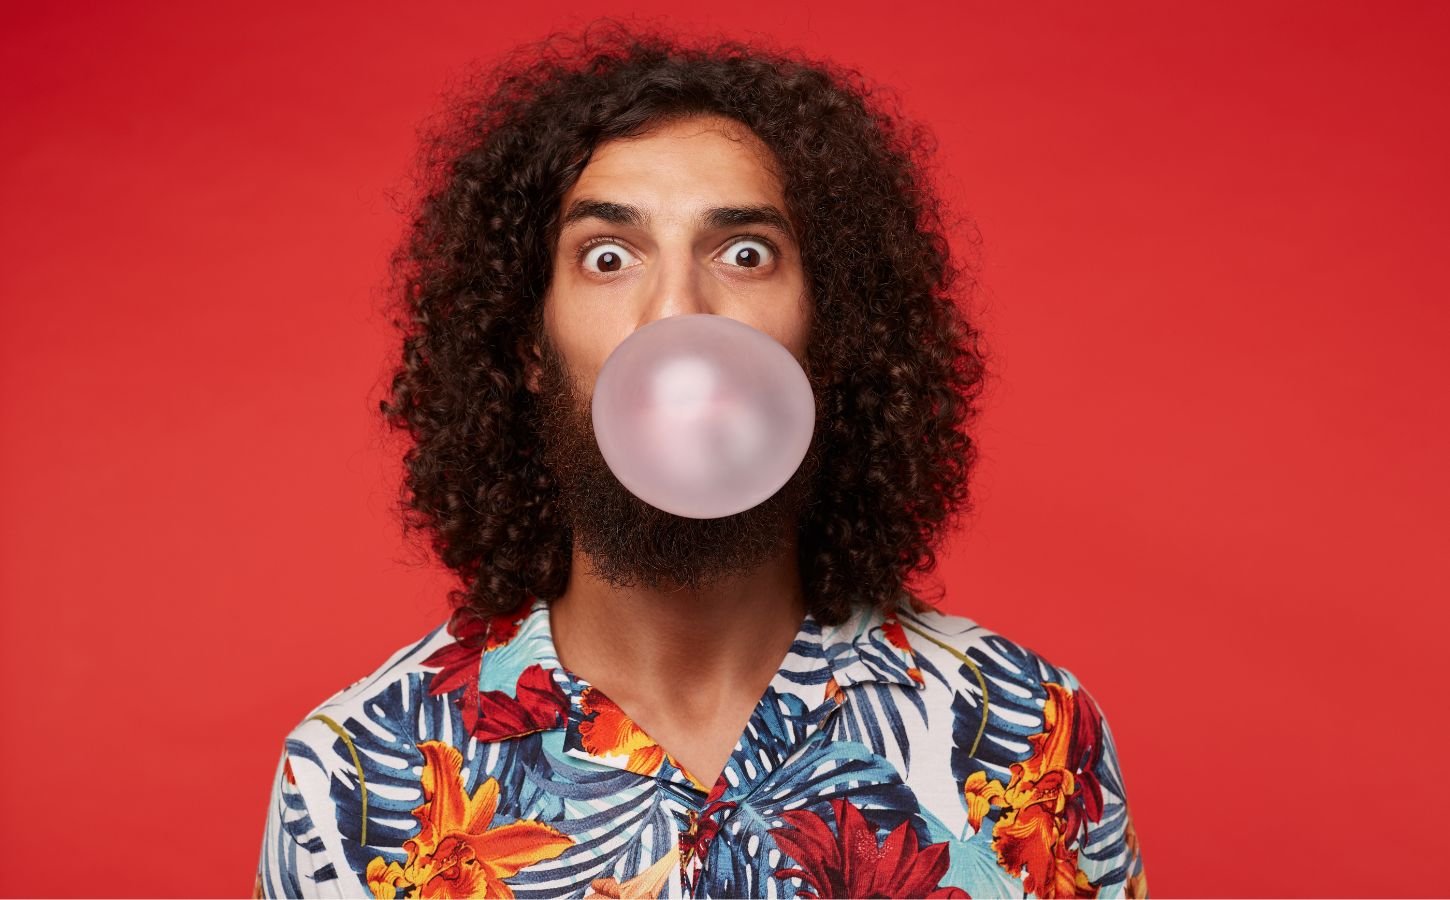 A person blowing a bubble with chewing gum on a red background